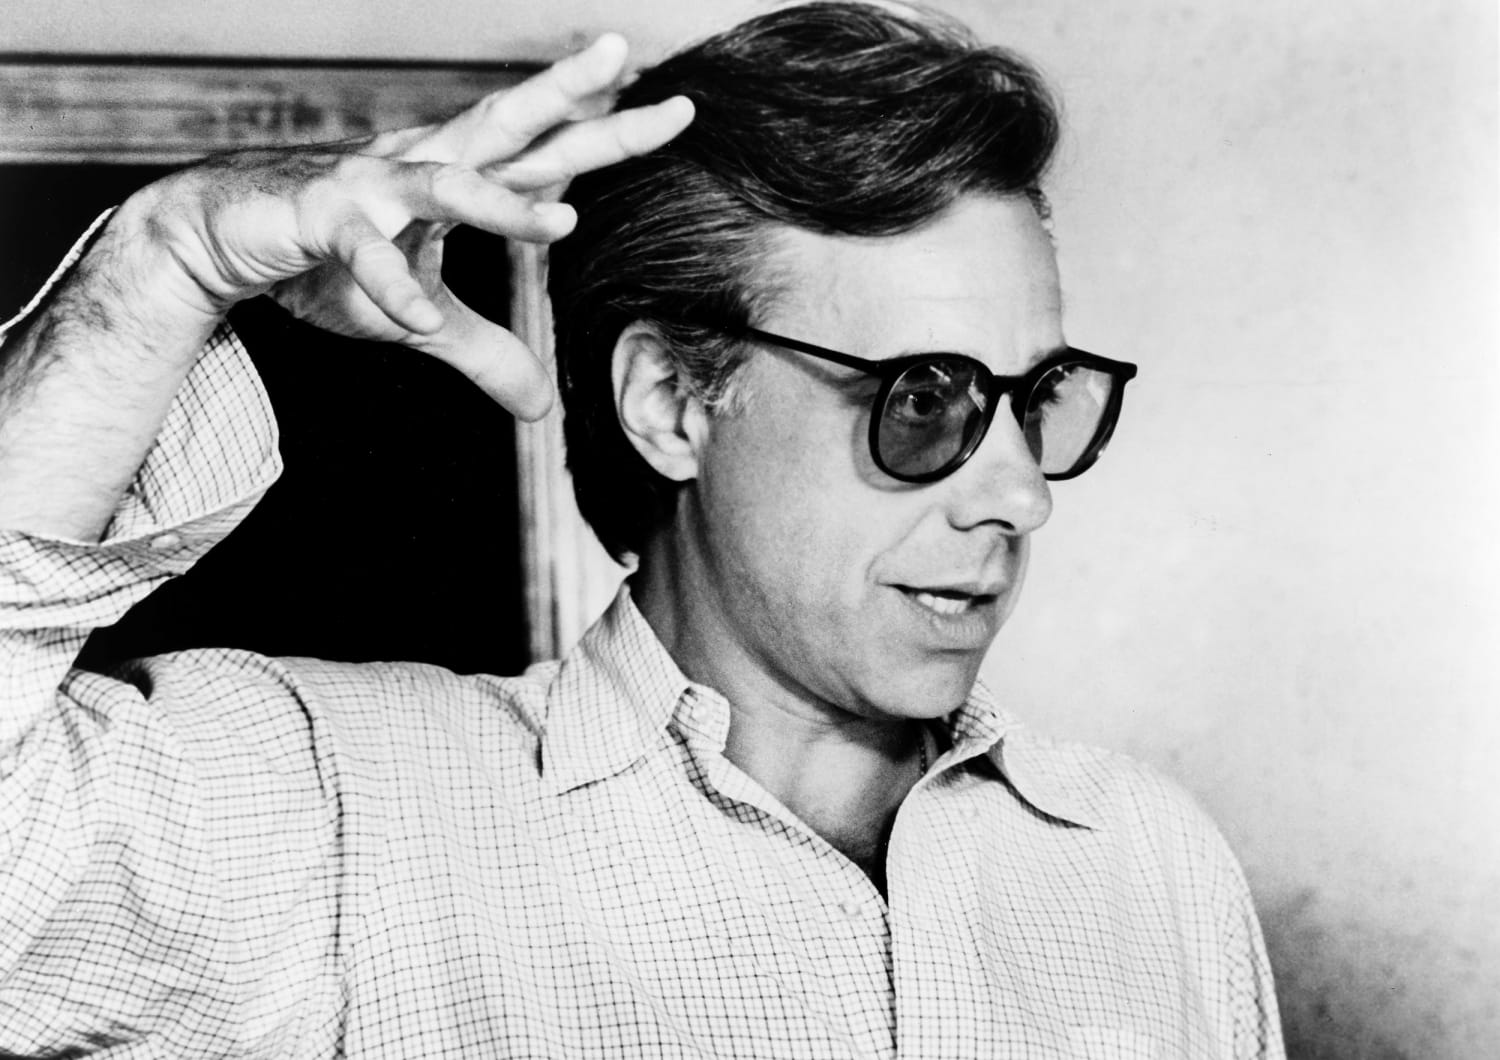 Peter Bogdanovich, director of ‘The Last Picture Show’ and ‘Paper Moon,’ dies at 82